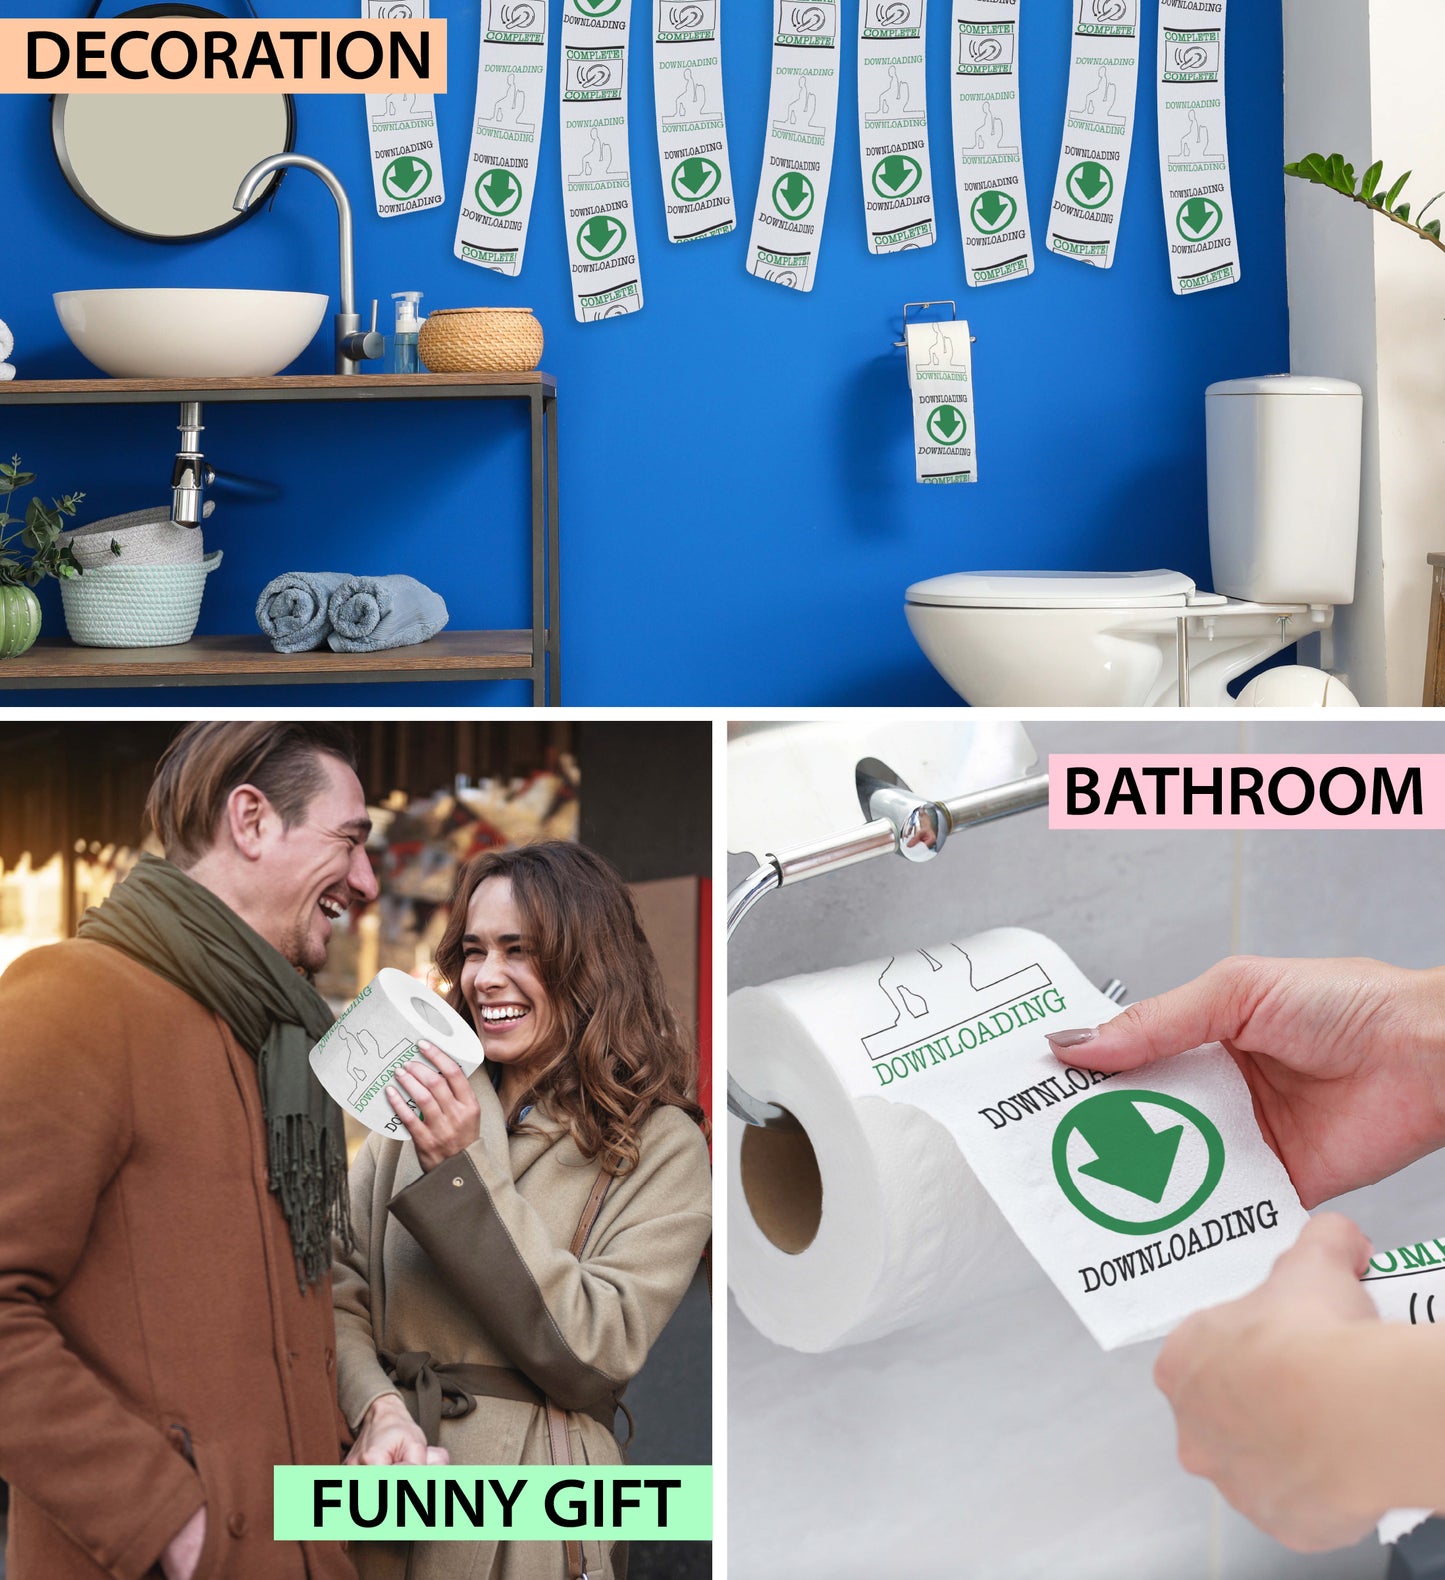 Printed TP Downloading Complete Printed Toilet Paper Funny Gag Gift – 500 Sheet